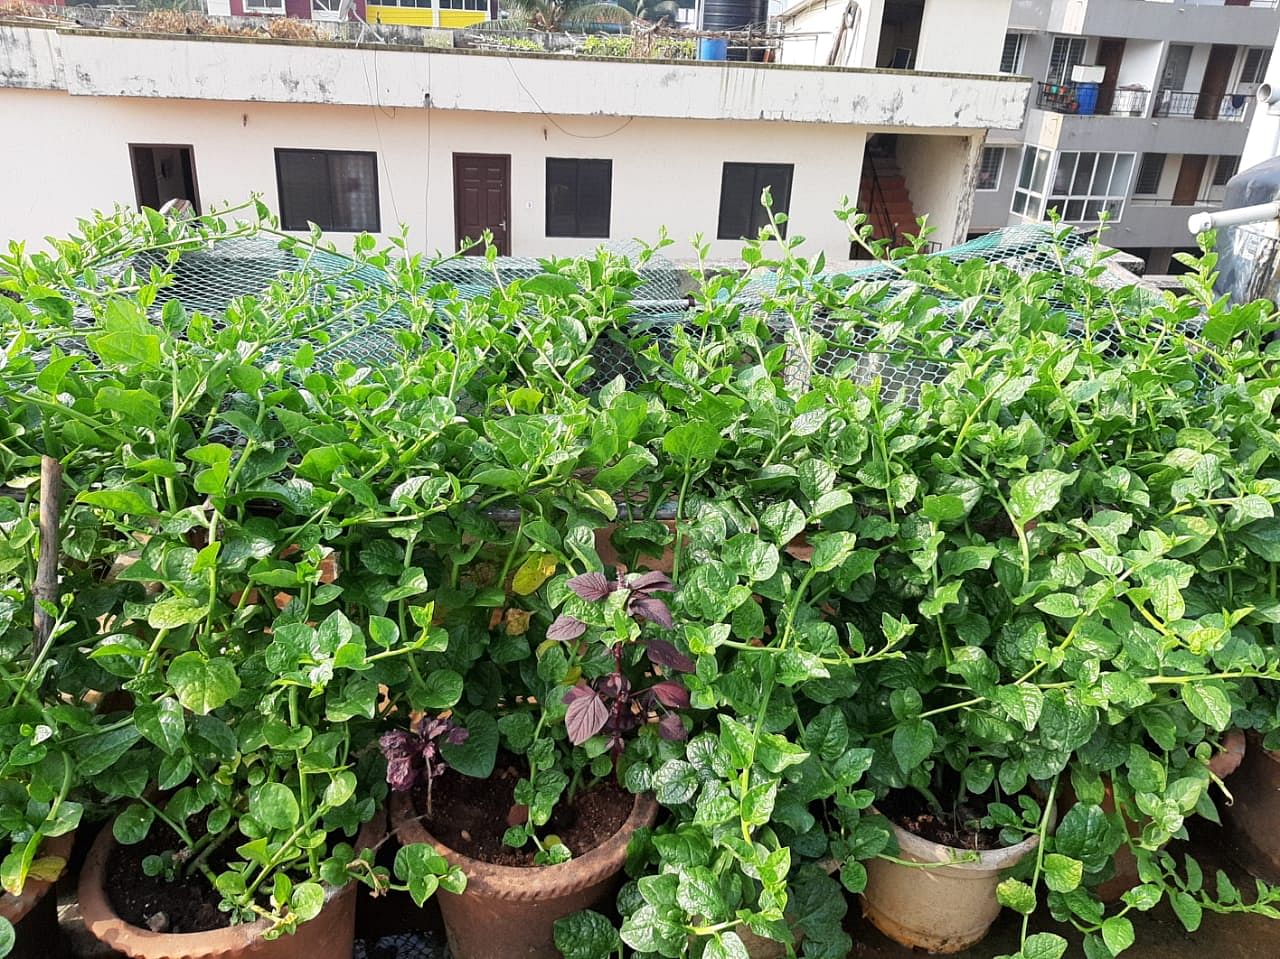 Basale cultivated in pots in rooftop. Credit: DH Photo